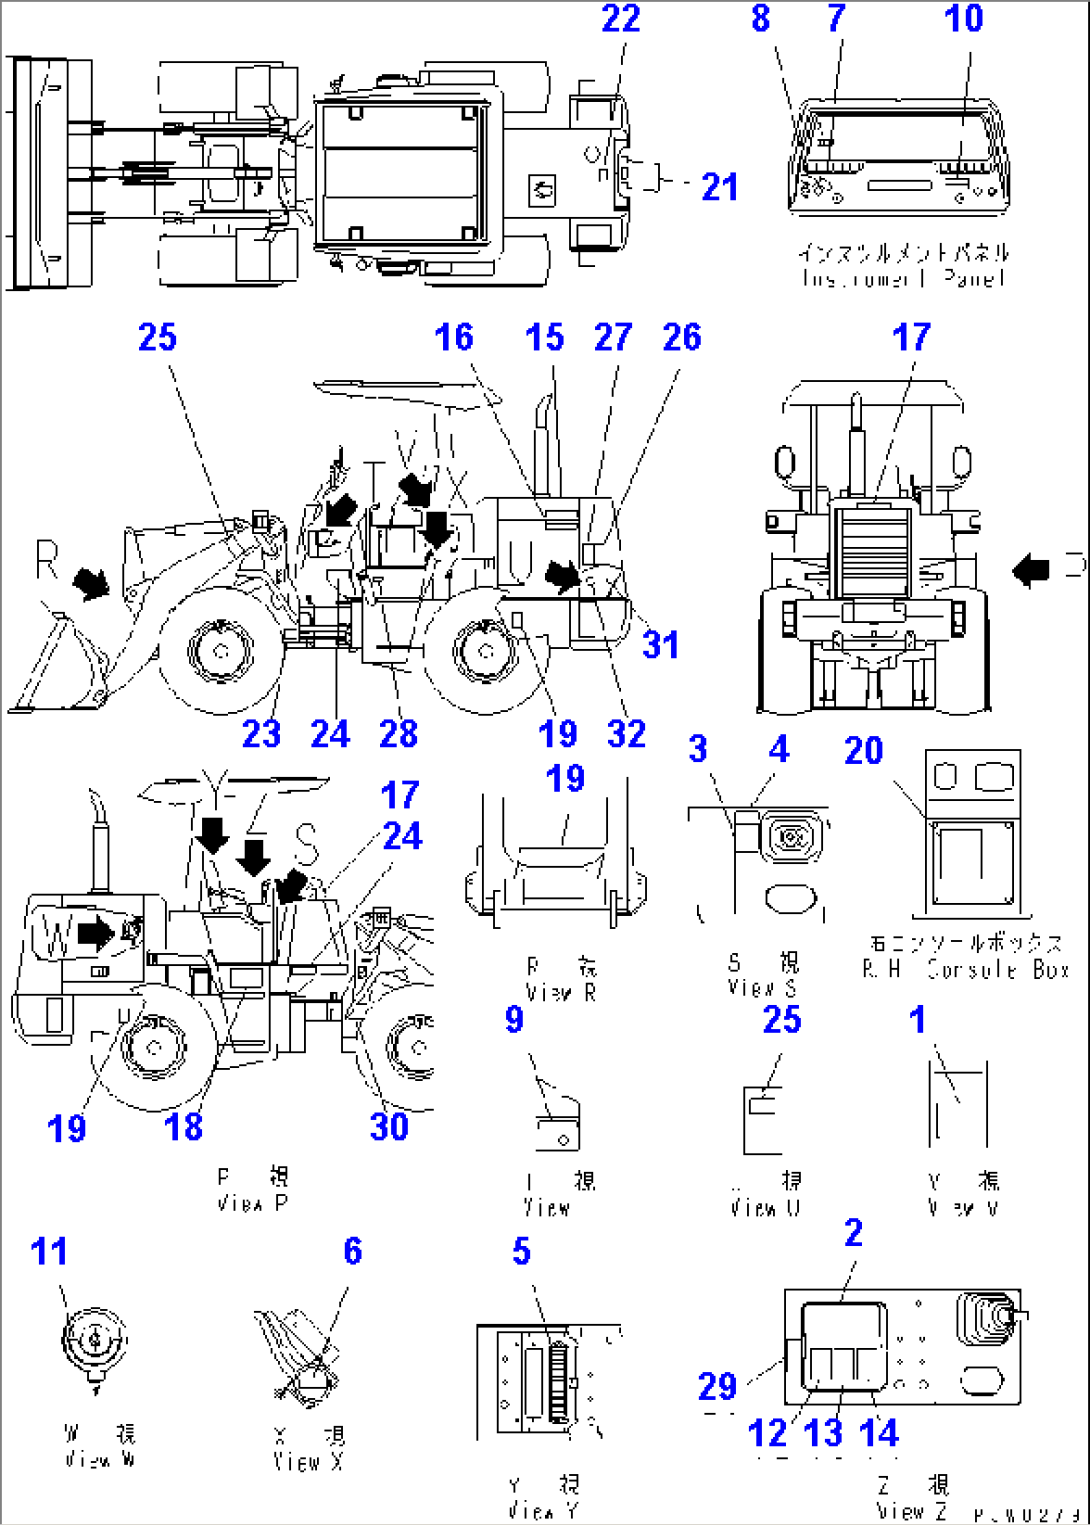 MARKS AND PLATES(#10086-11500)